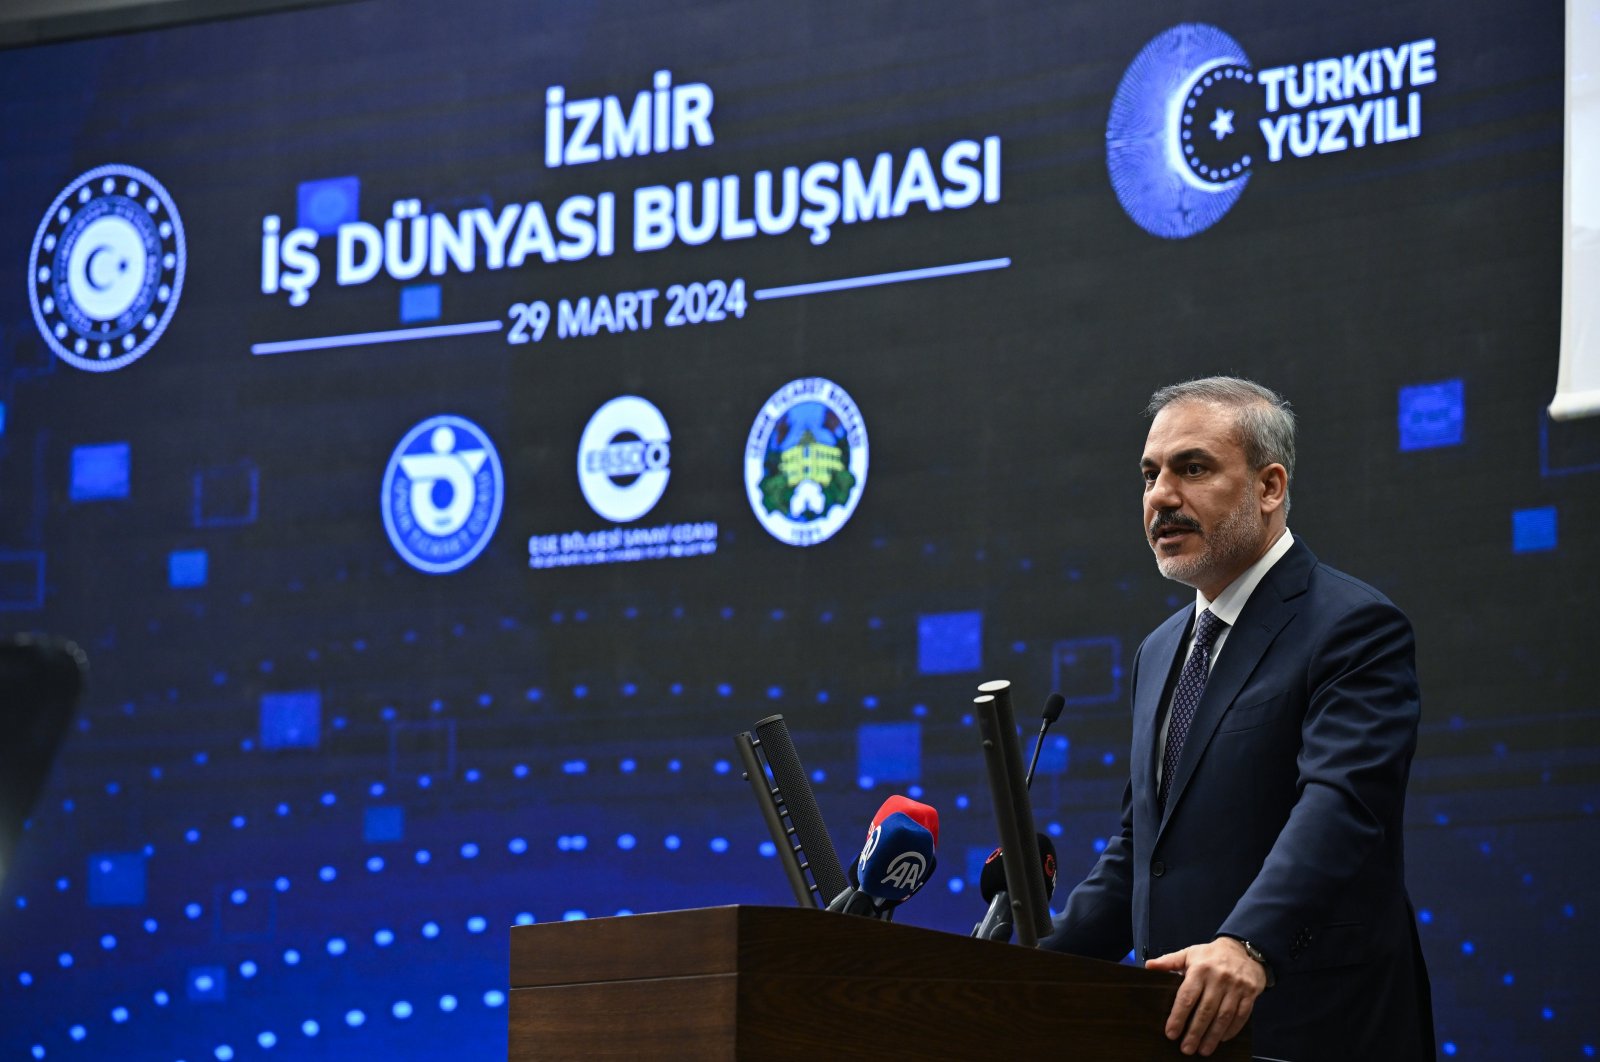 Foreign Minister Hakan Fidan speaks at the &quot;Izmir Business World Gathering&quot; event organized by the Izmir Chamber of Commerce, March 29, 2024. (AA Photo)